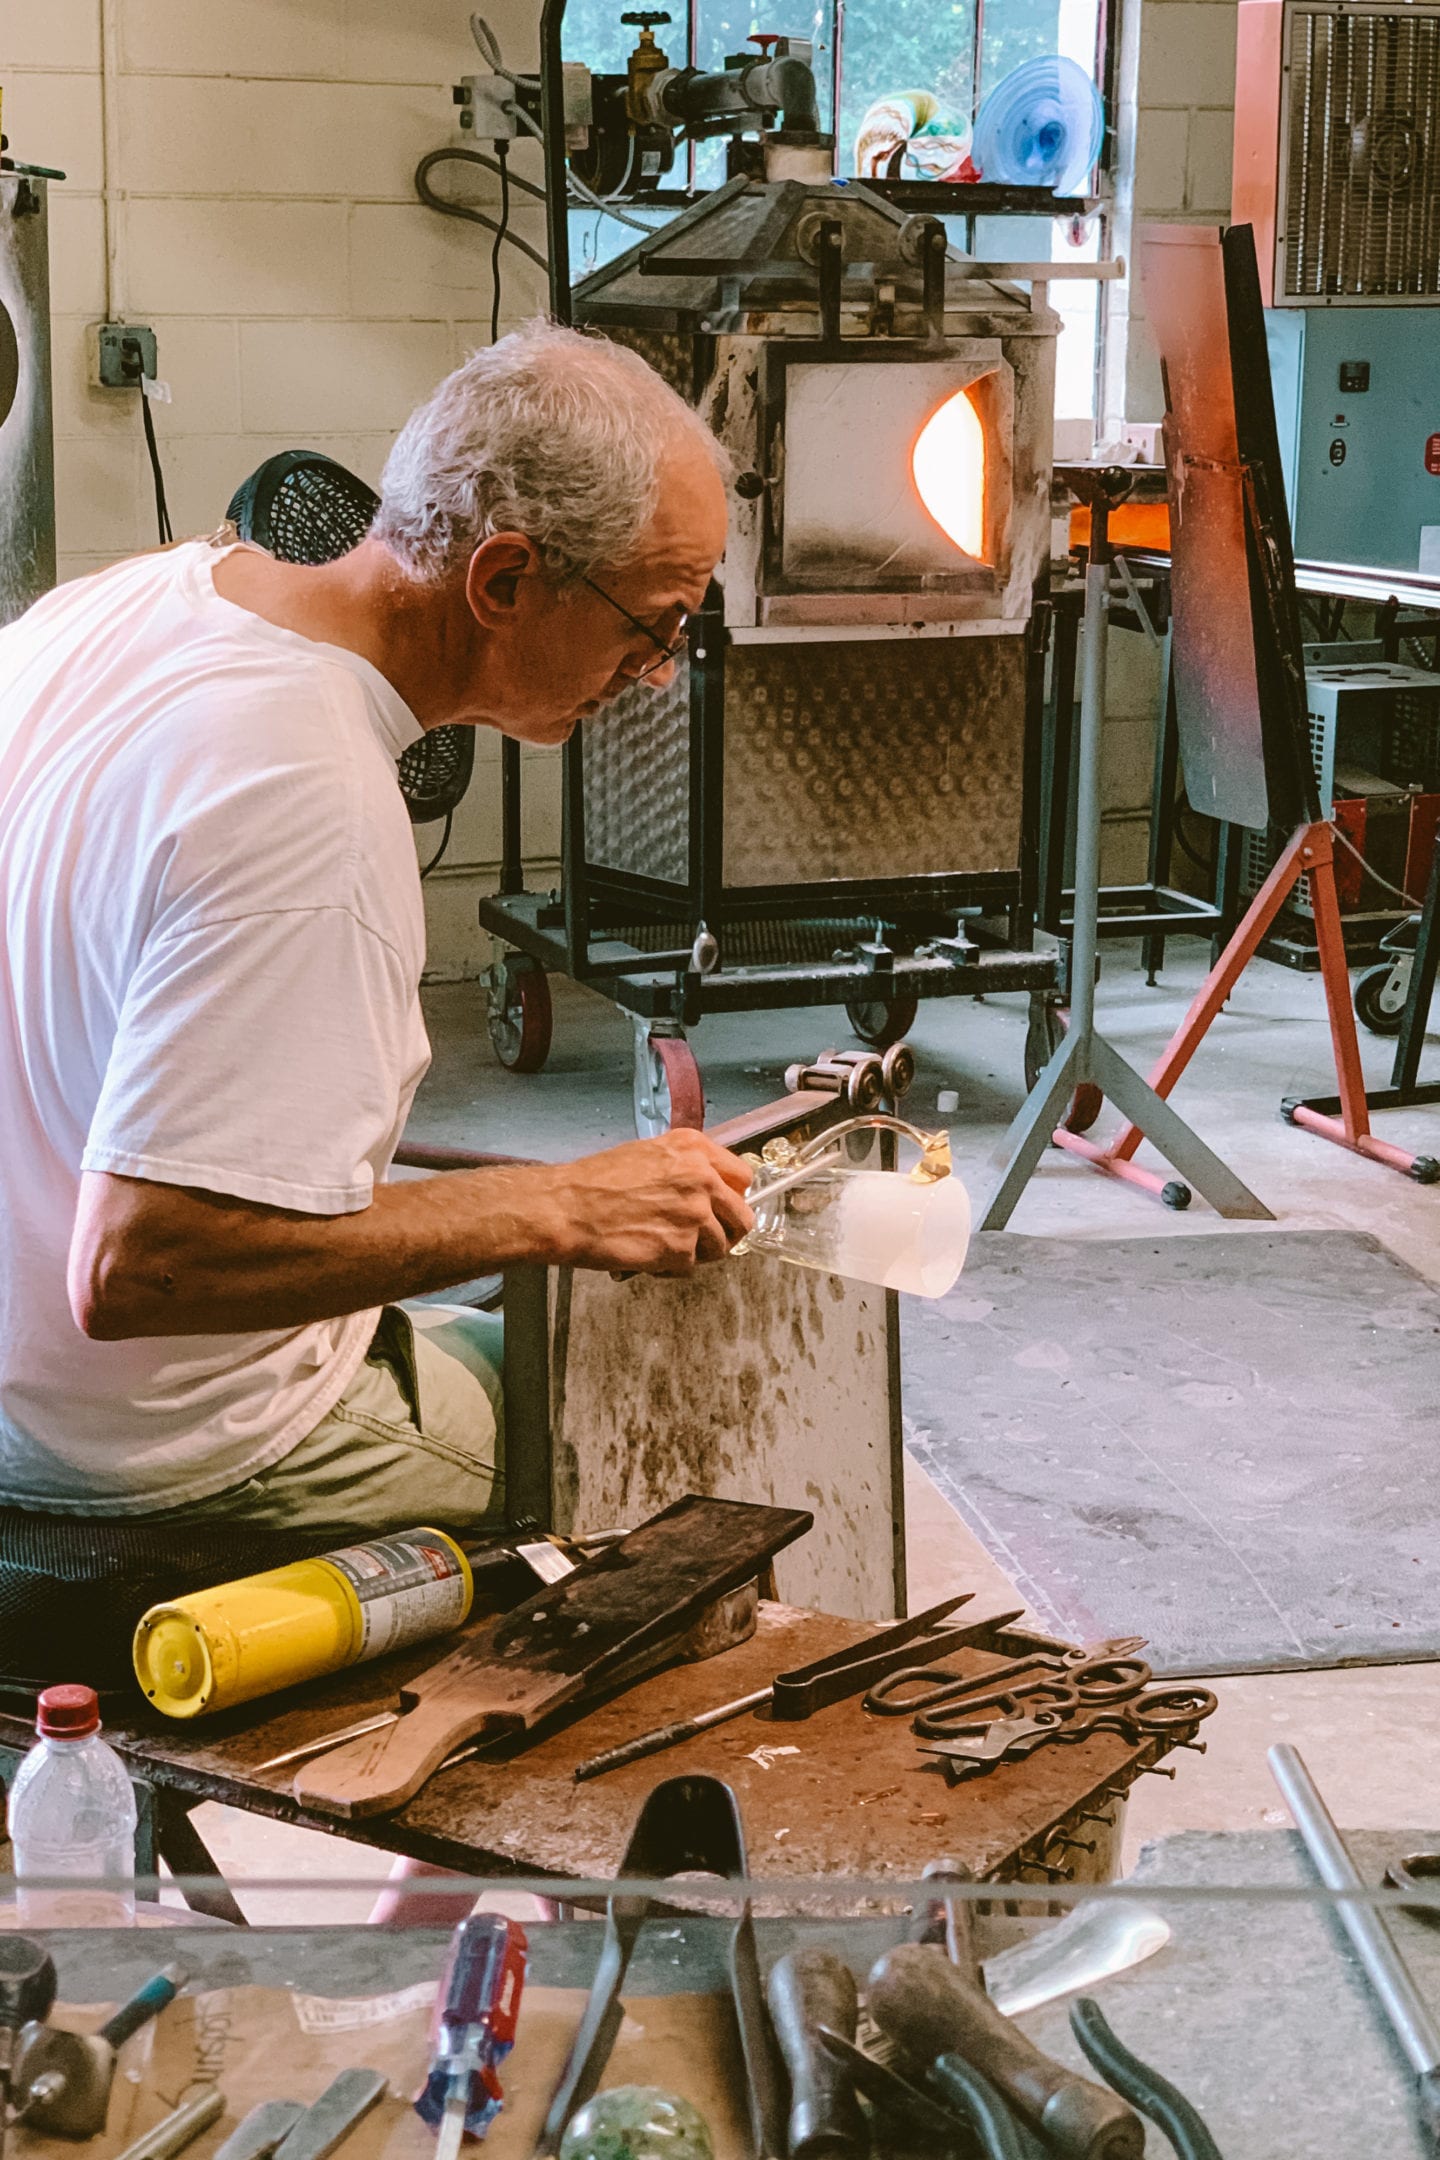 man doing a glass blowing demonstration